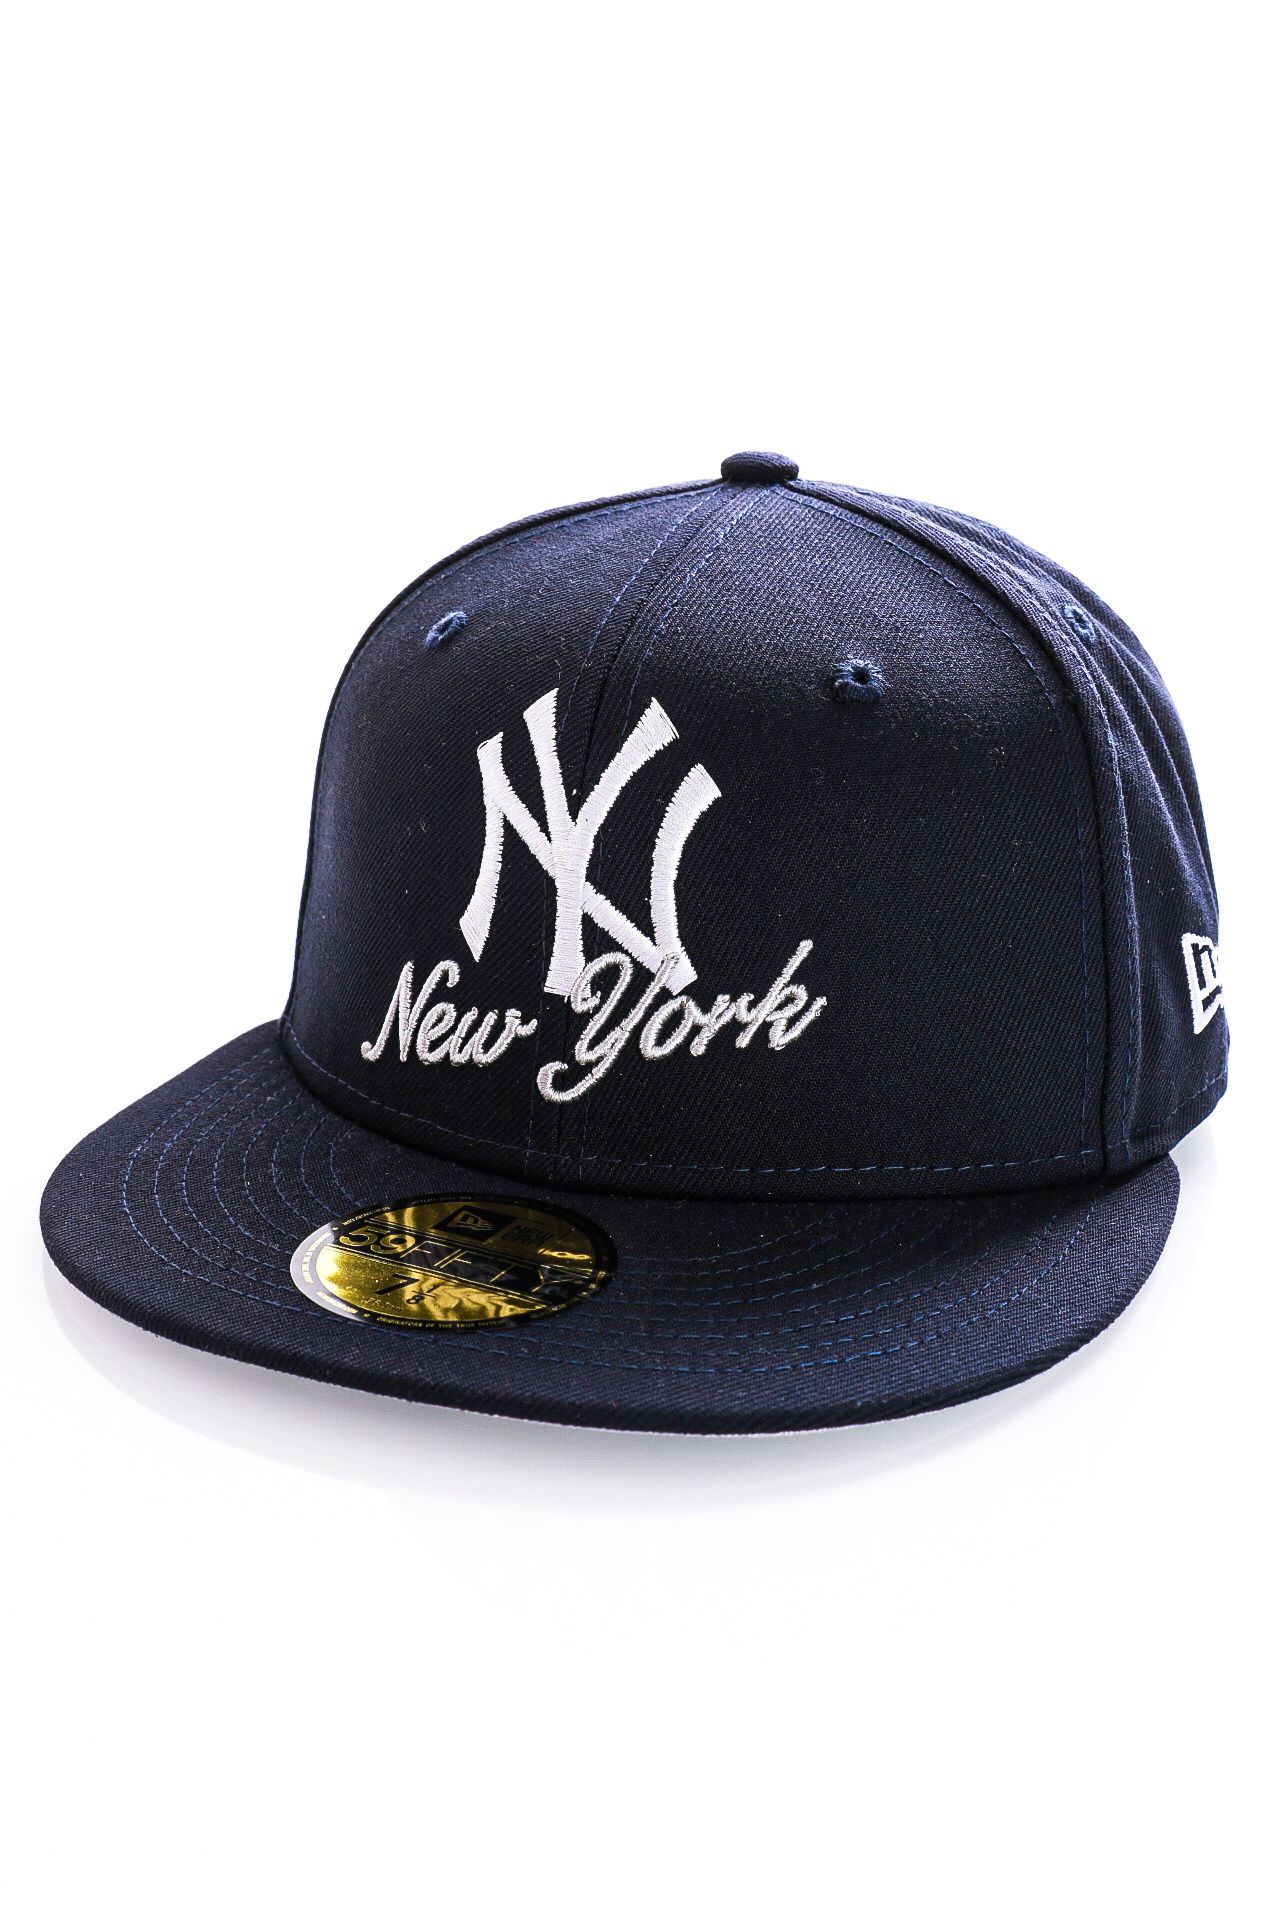 Afbeelding van New Era Fitted Cap NEW YORK YANKEES DUAL LOGO COOPERSTOWN OFFICIAL TEAM COLOUR NE60288033